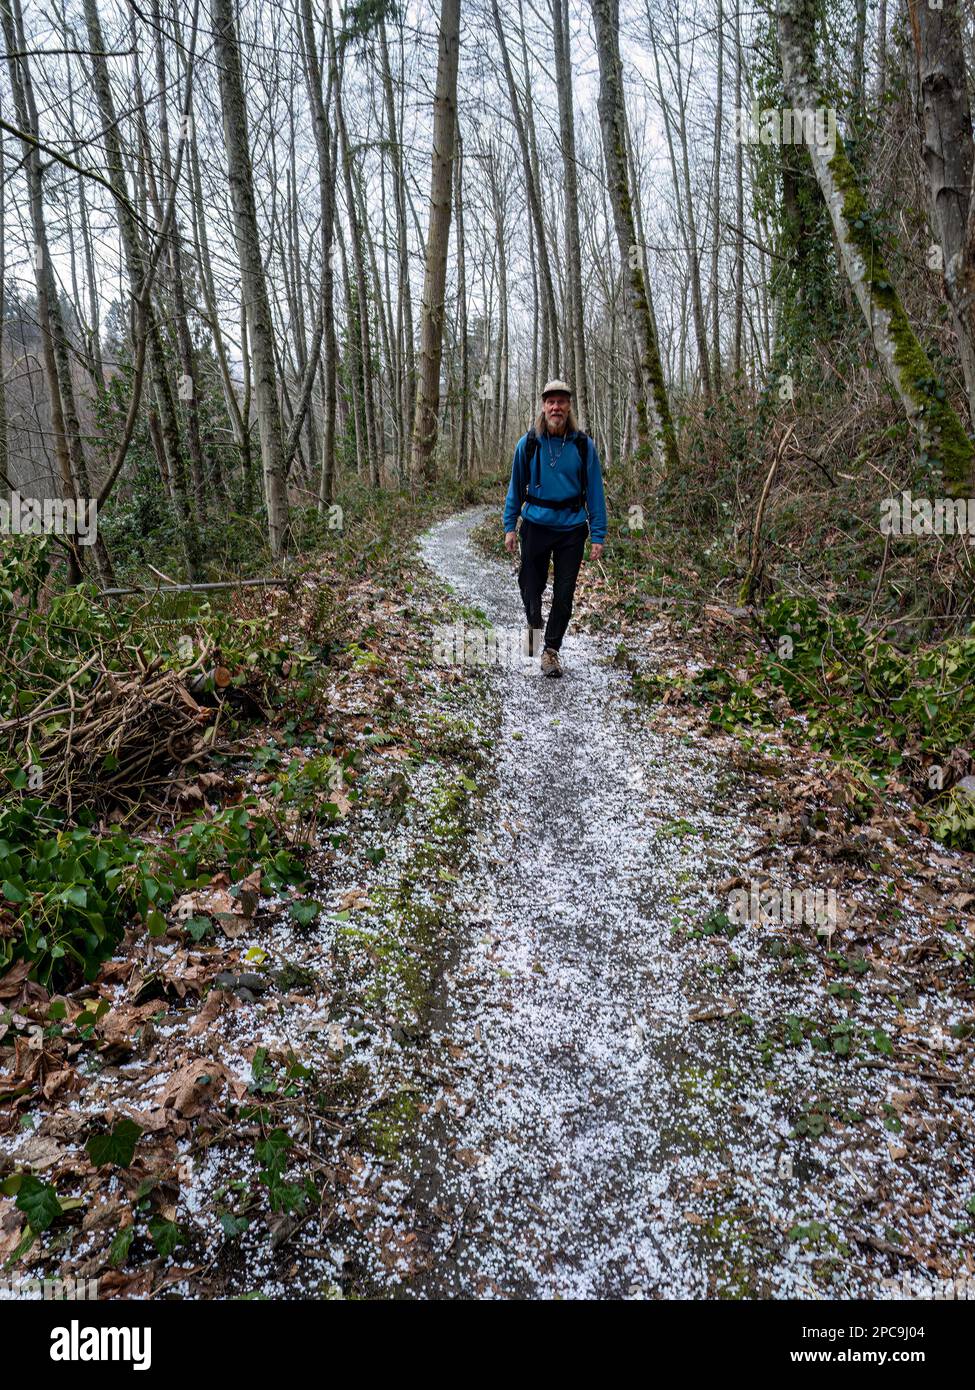 WA23251-00...WASHINGTON - Hiker on a trail covered with hail durring a hail storm at Mukilteo's Trails and Tails Dog Park. Stock Photo